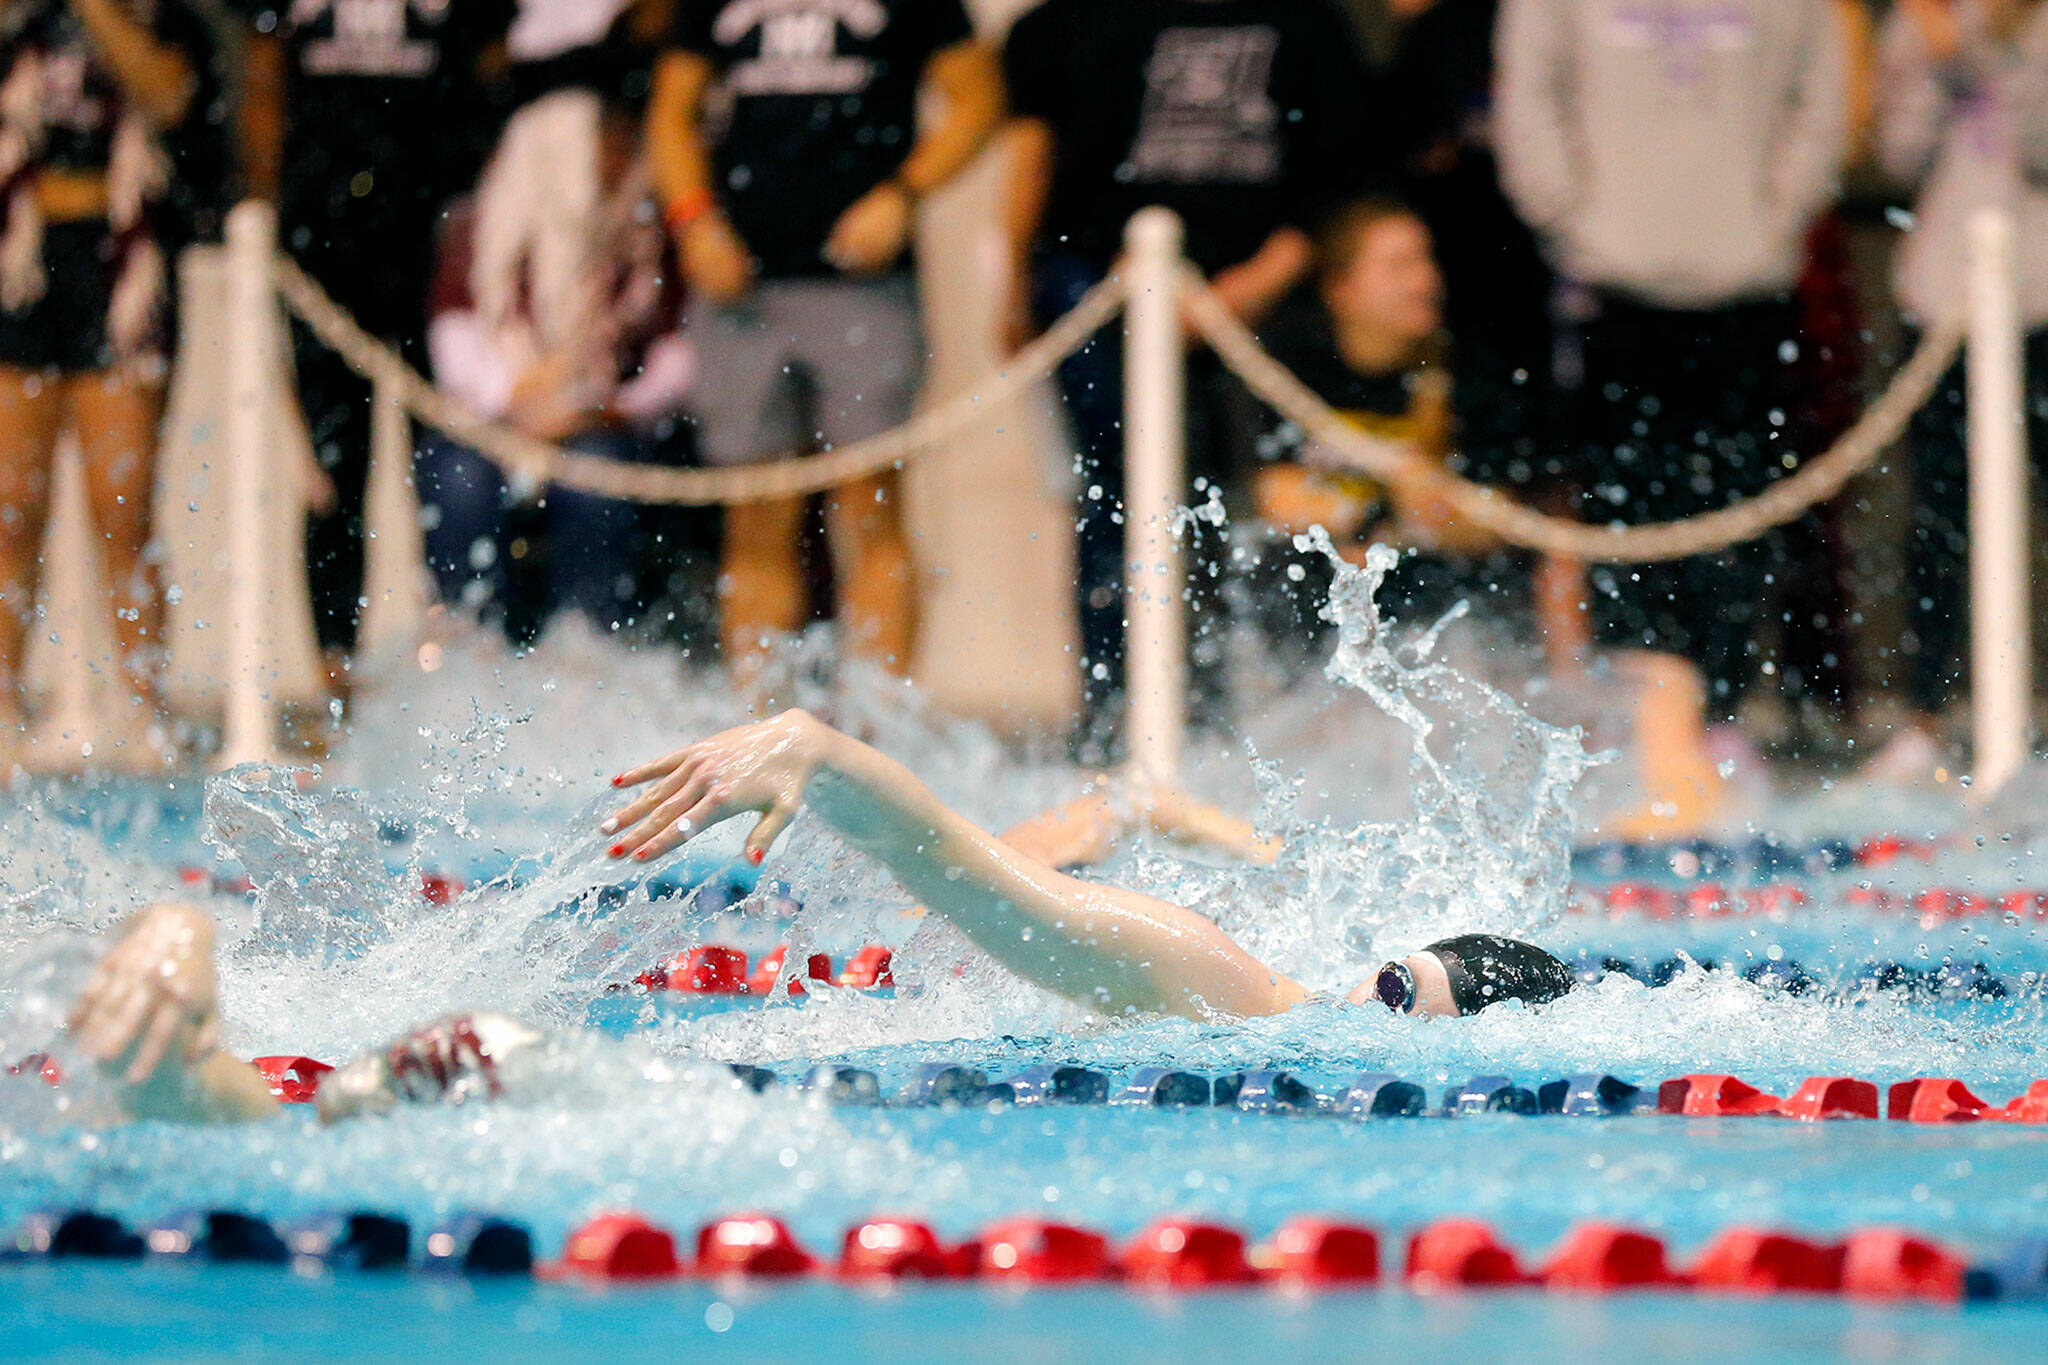 Snohomish junior Mary Clarke swims in the 100 yard freestyle final during the WIAA 3A Girls State Swim and Dive Championships on Saturday, Nov. 12, 2022, at the Weyerhaeuser King County Aquatic Center in Federal Way, Washington. (Ryan Berry / The Herald)